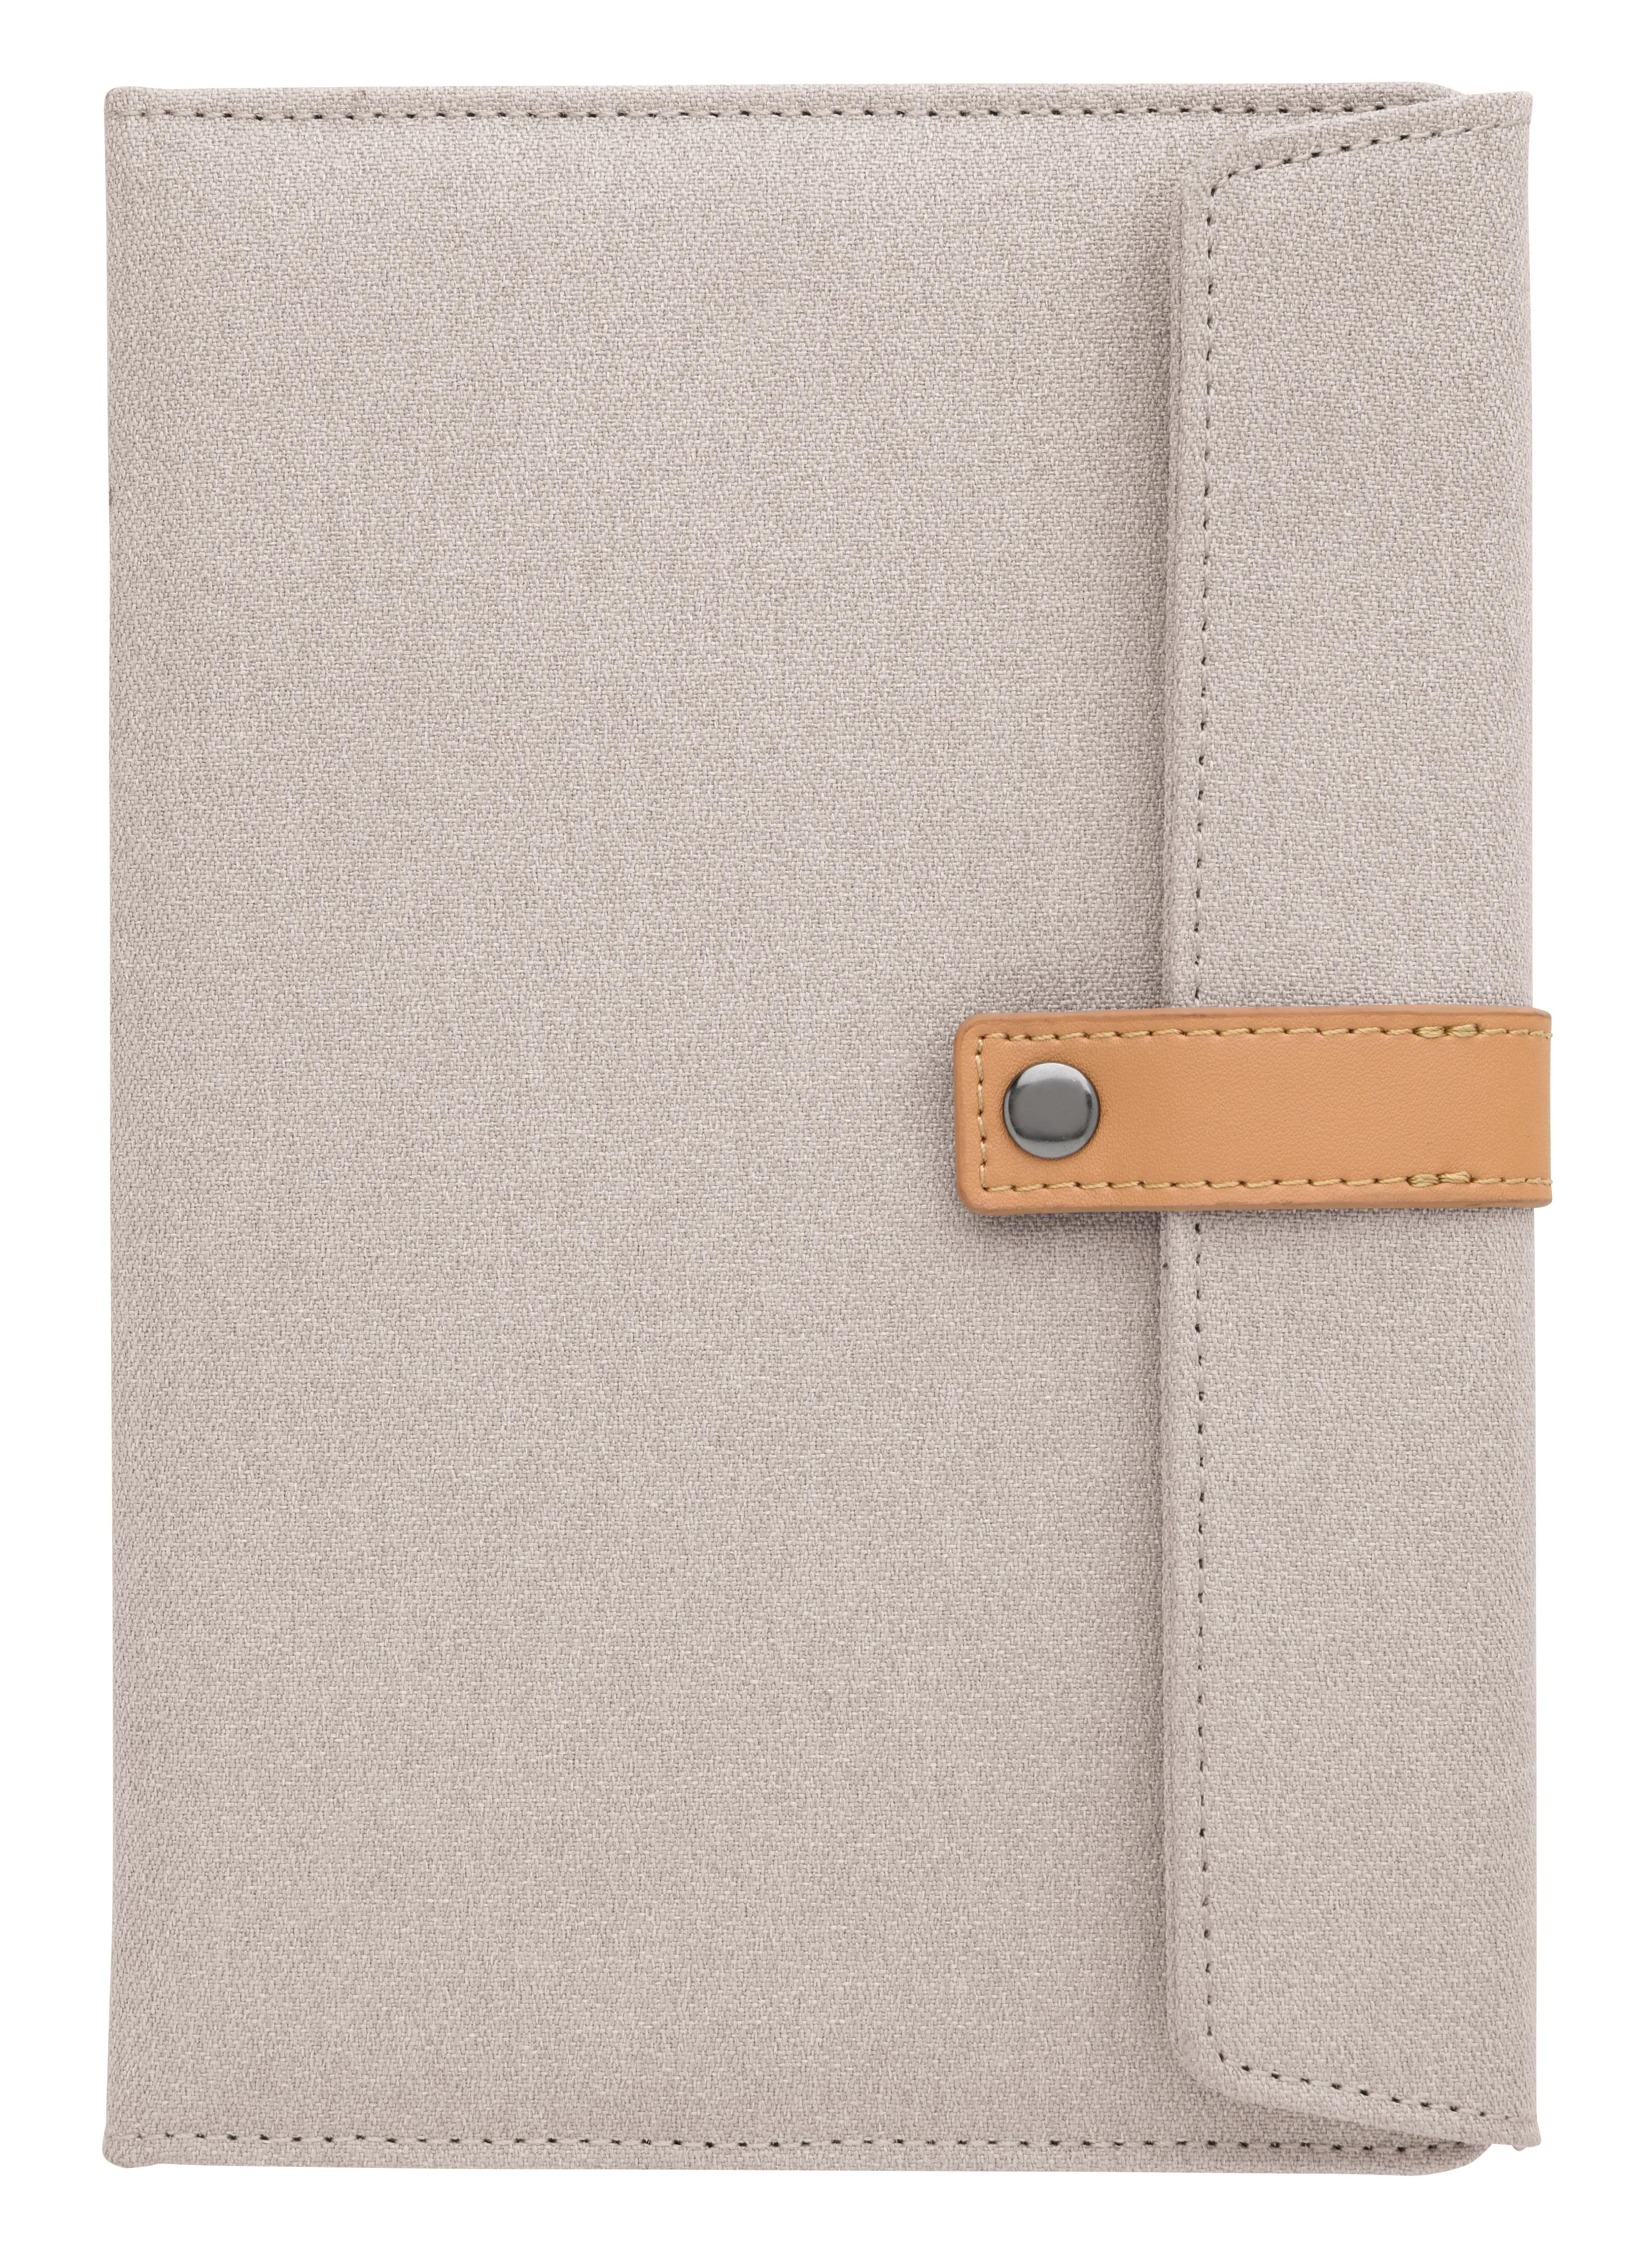 Two-Tone Journal with Leather Closure 8 of 9